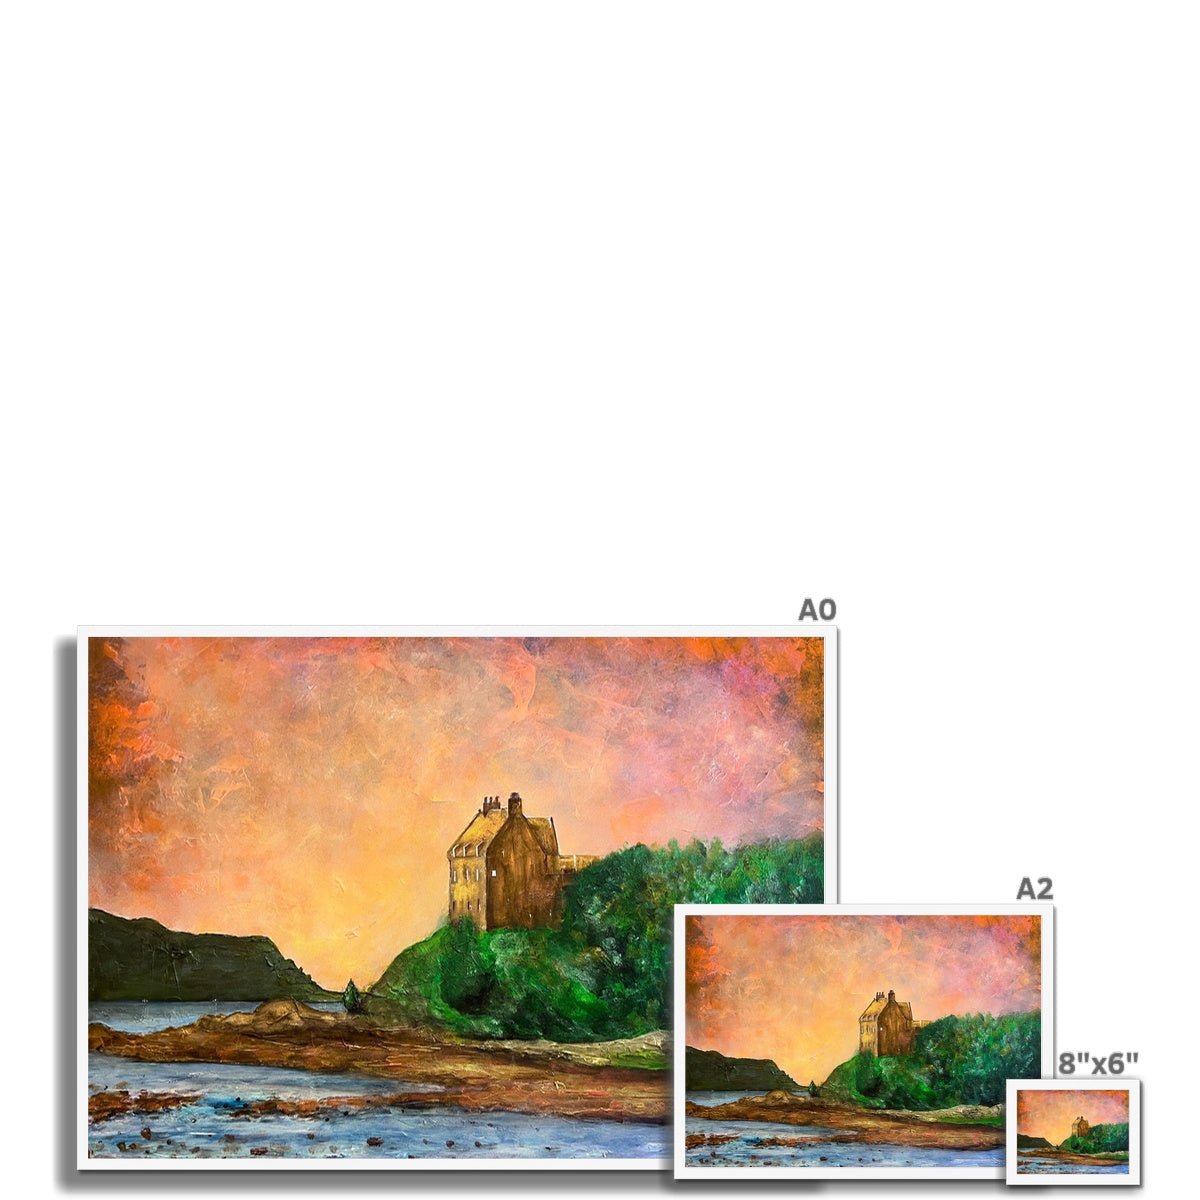 Duntrune Castle Painting | Framed Prints From Scotland-Framed Prints-Historic & Iconic Scotland Art Gallery-Paintings, Prints, Homeware, Art Gifts From Scotland By Scottish Artist Kevin Hunter